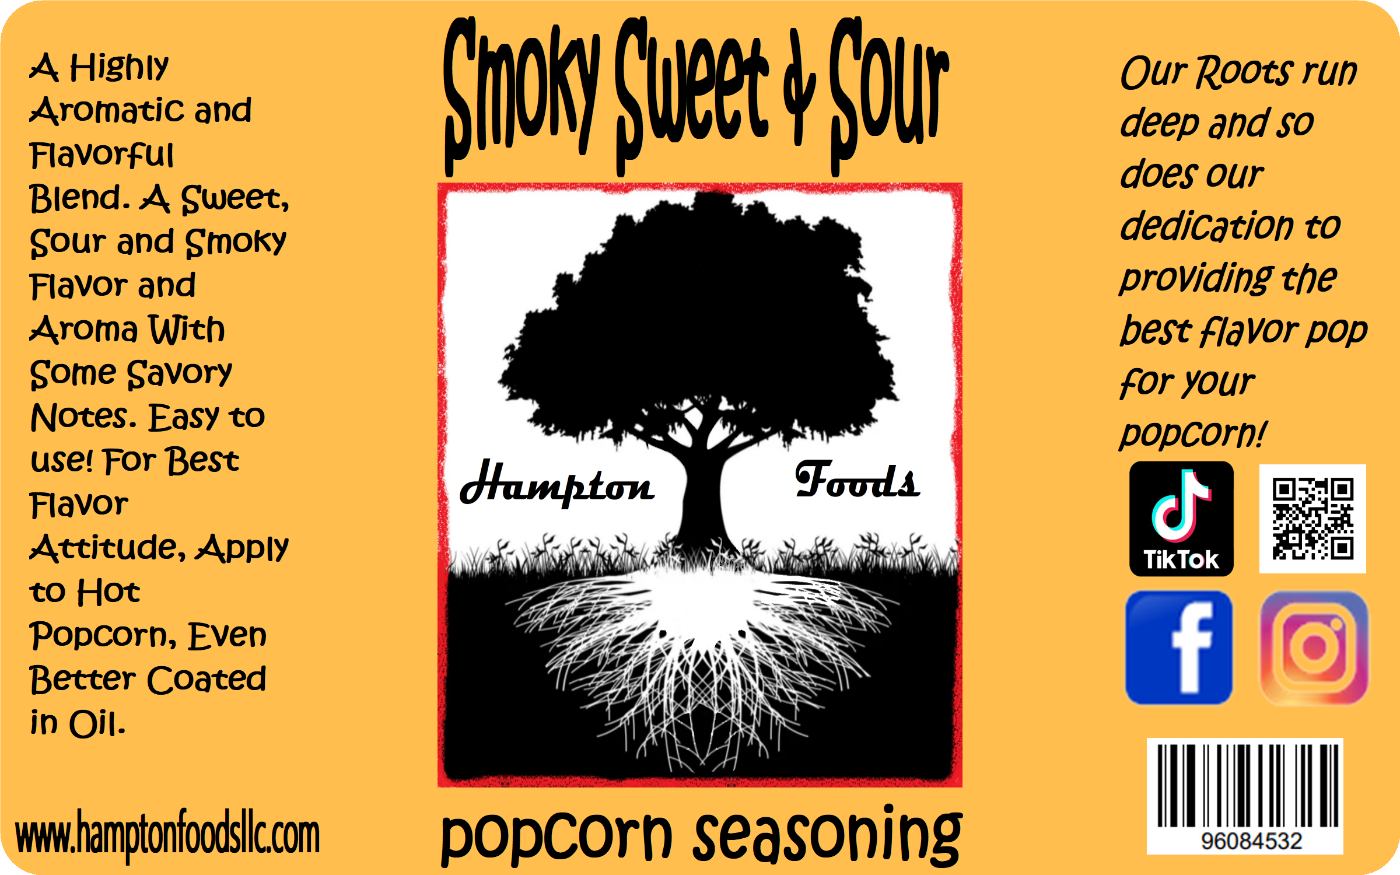 Smoky Sweet and Sour Popcorn Seasoning, a Highly Aromatic and Flavorful Blend. A Sweet, Sour and Smoky Flavor and Aroma With Some Savory Notes. Easy to use! For Best Flavor Attitude, Apply to Hot Popcorn, Even Better Coated in Oil.